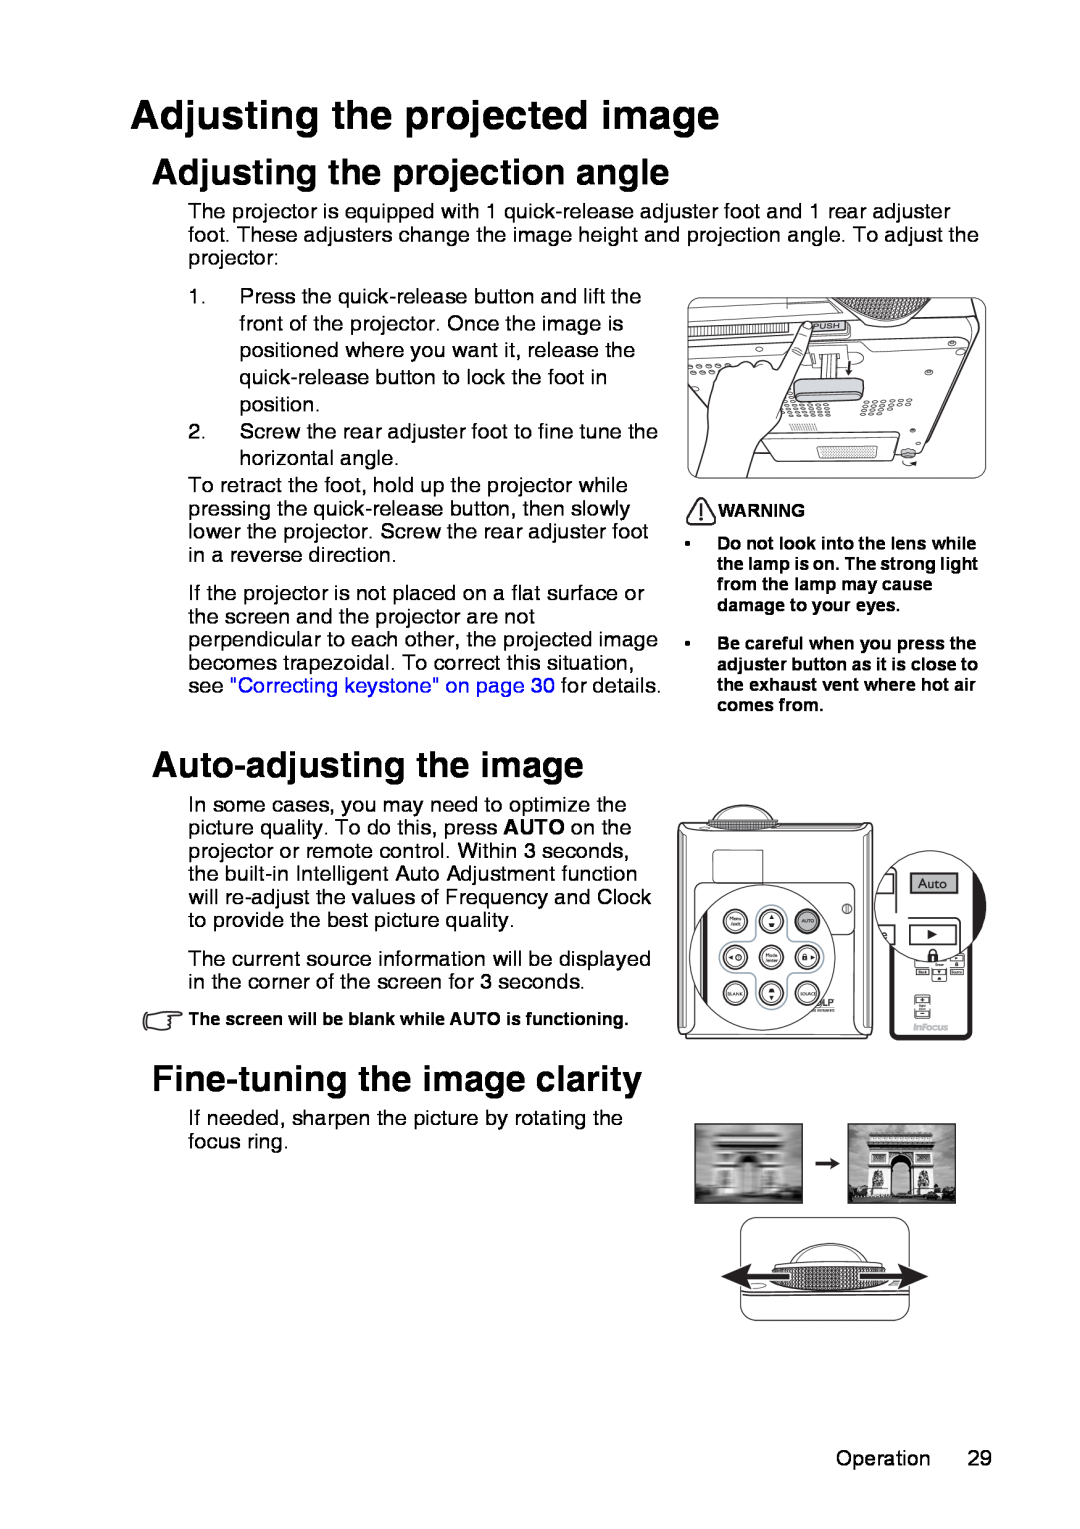 InFocus XS1 manual Adjusting the projected image, Adjusting the projection angle, Auto-adjusting the image 